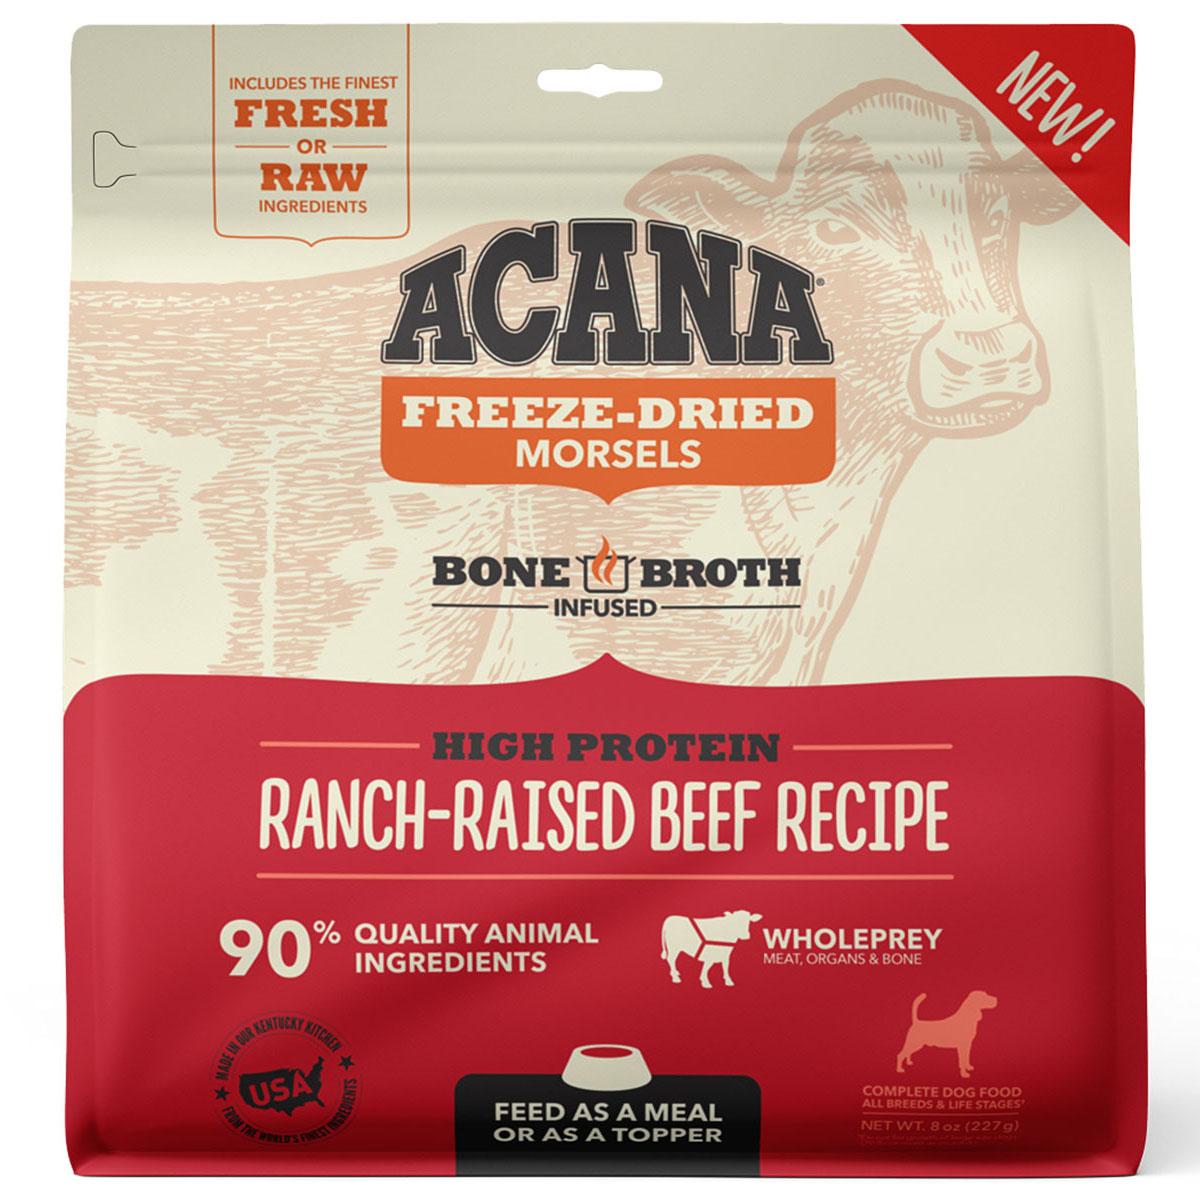 Acana Freeze-Dried Morsels Dog Food - Ranch-Raised Beef Recipe